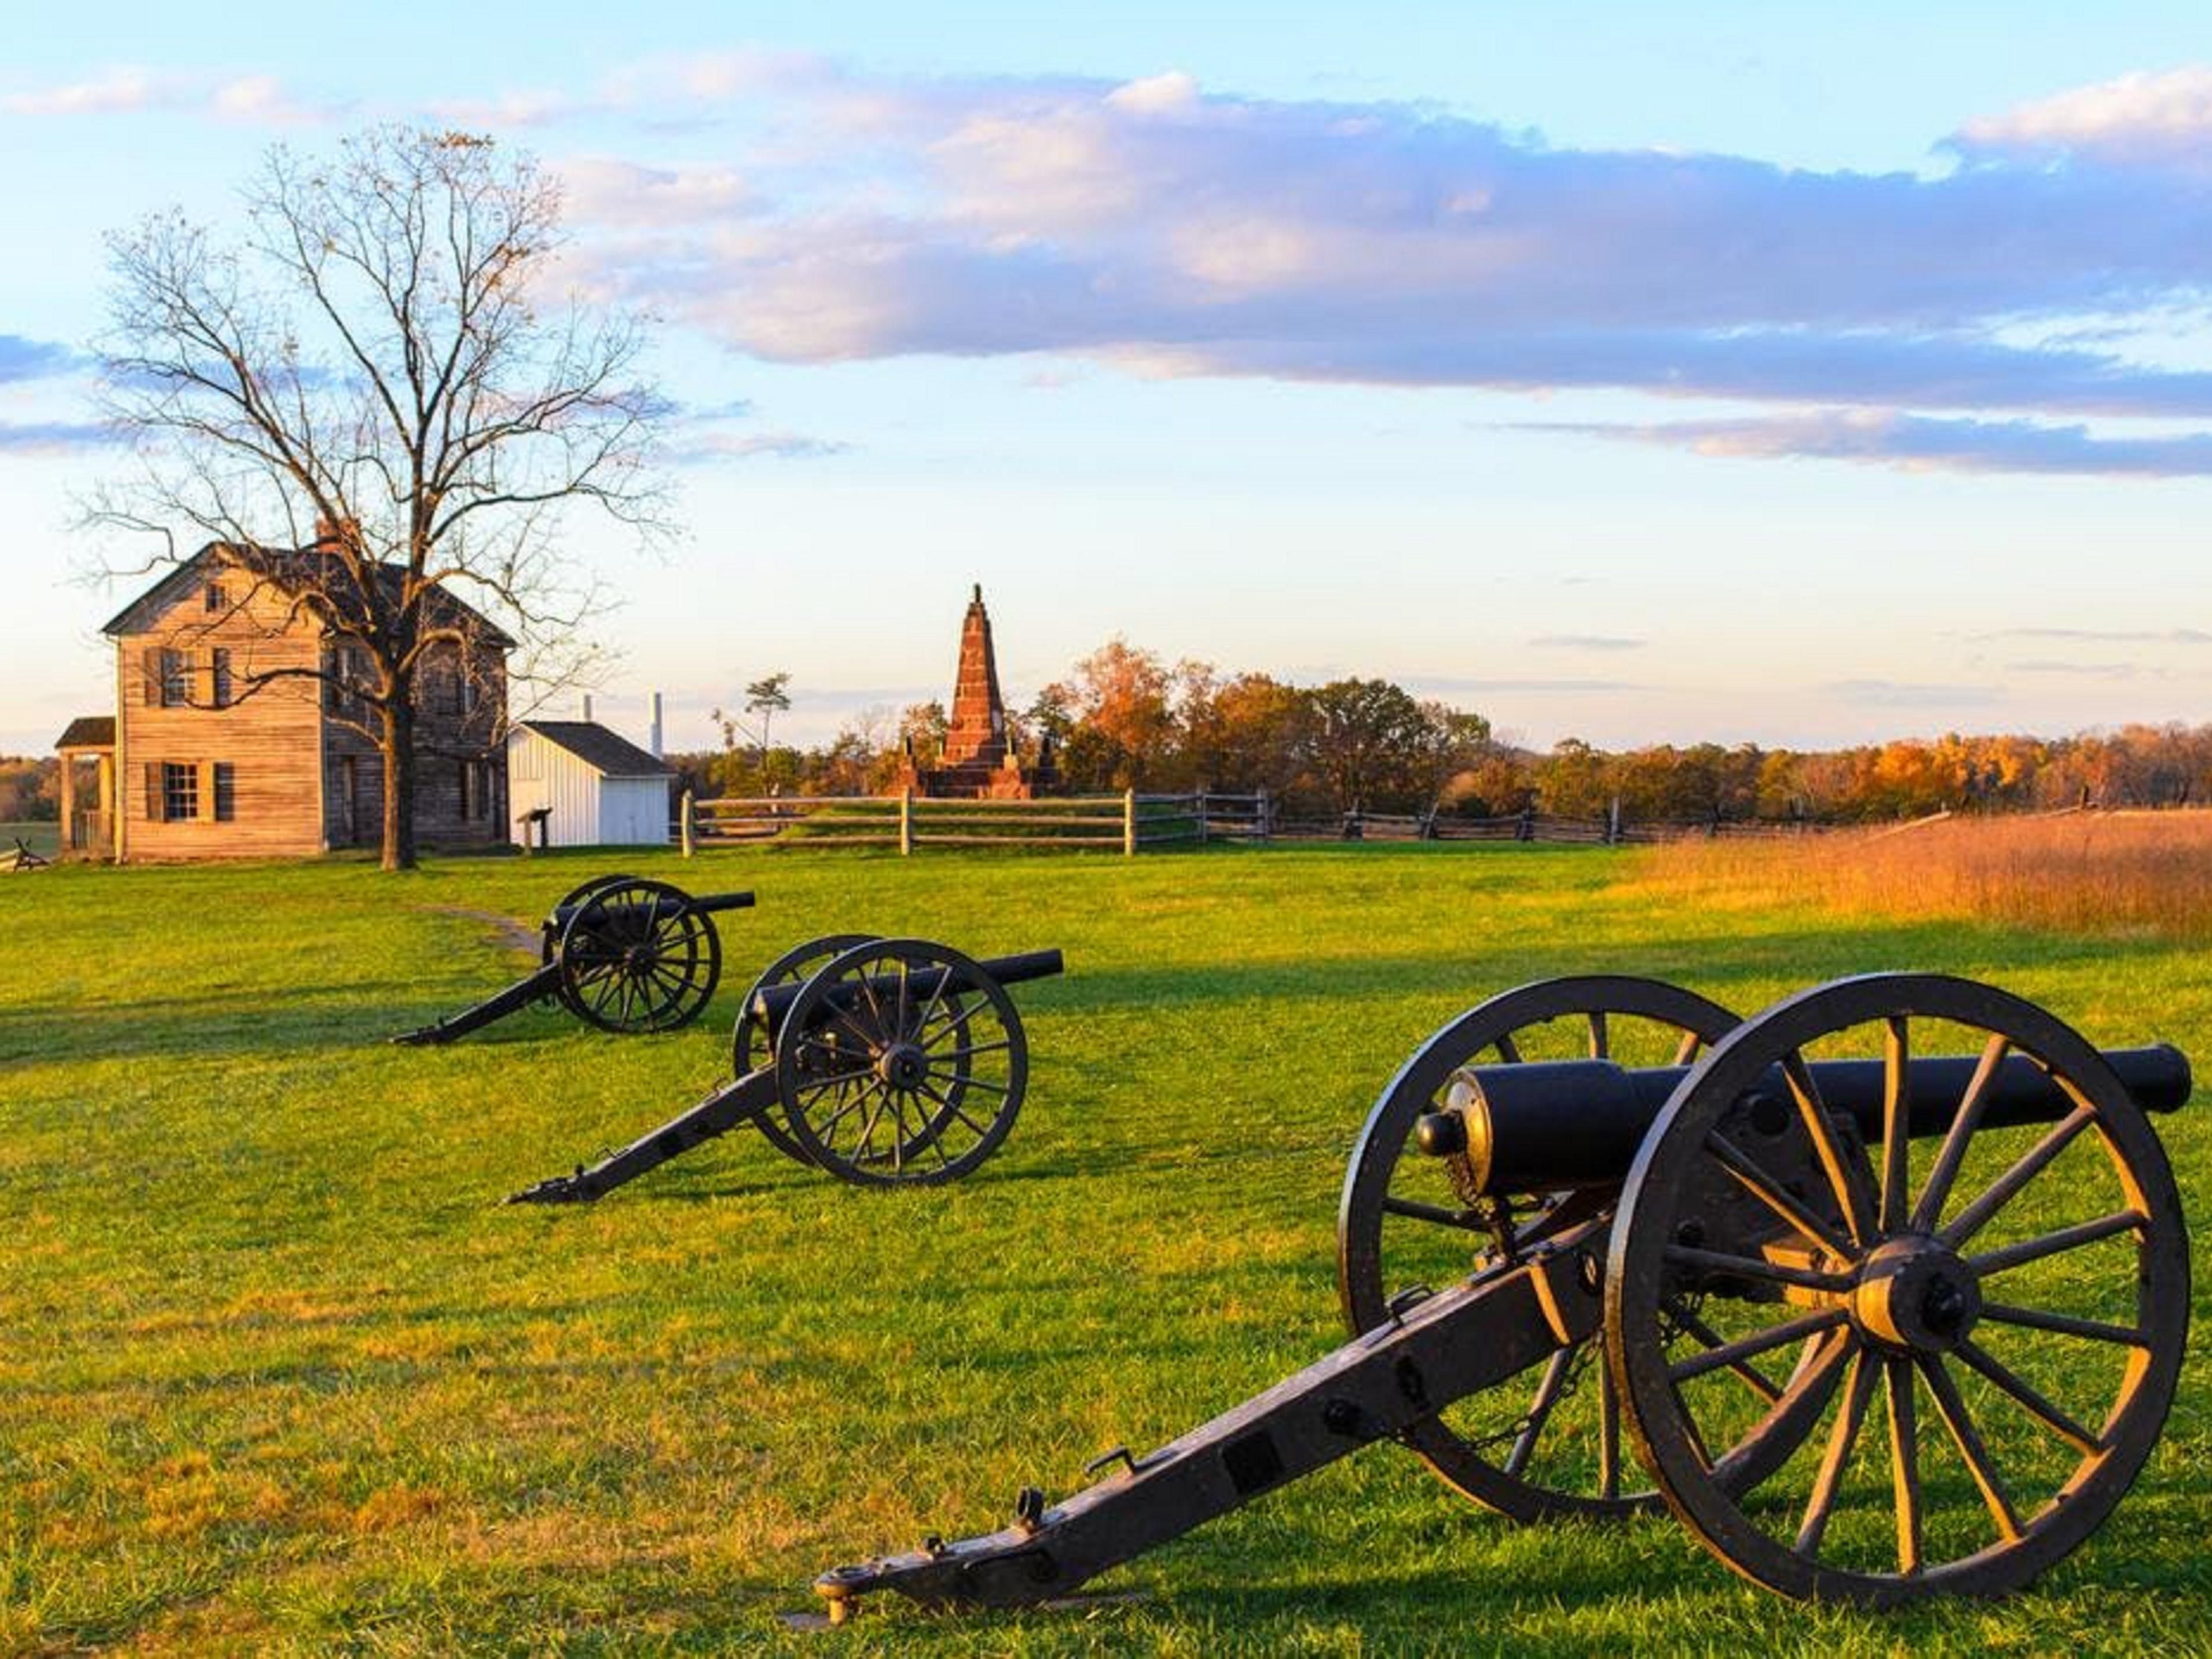 The Manassas Battlefield is a must-see for anyone interested in American history.